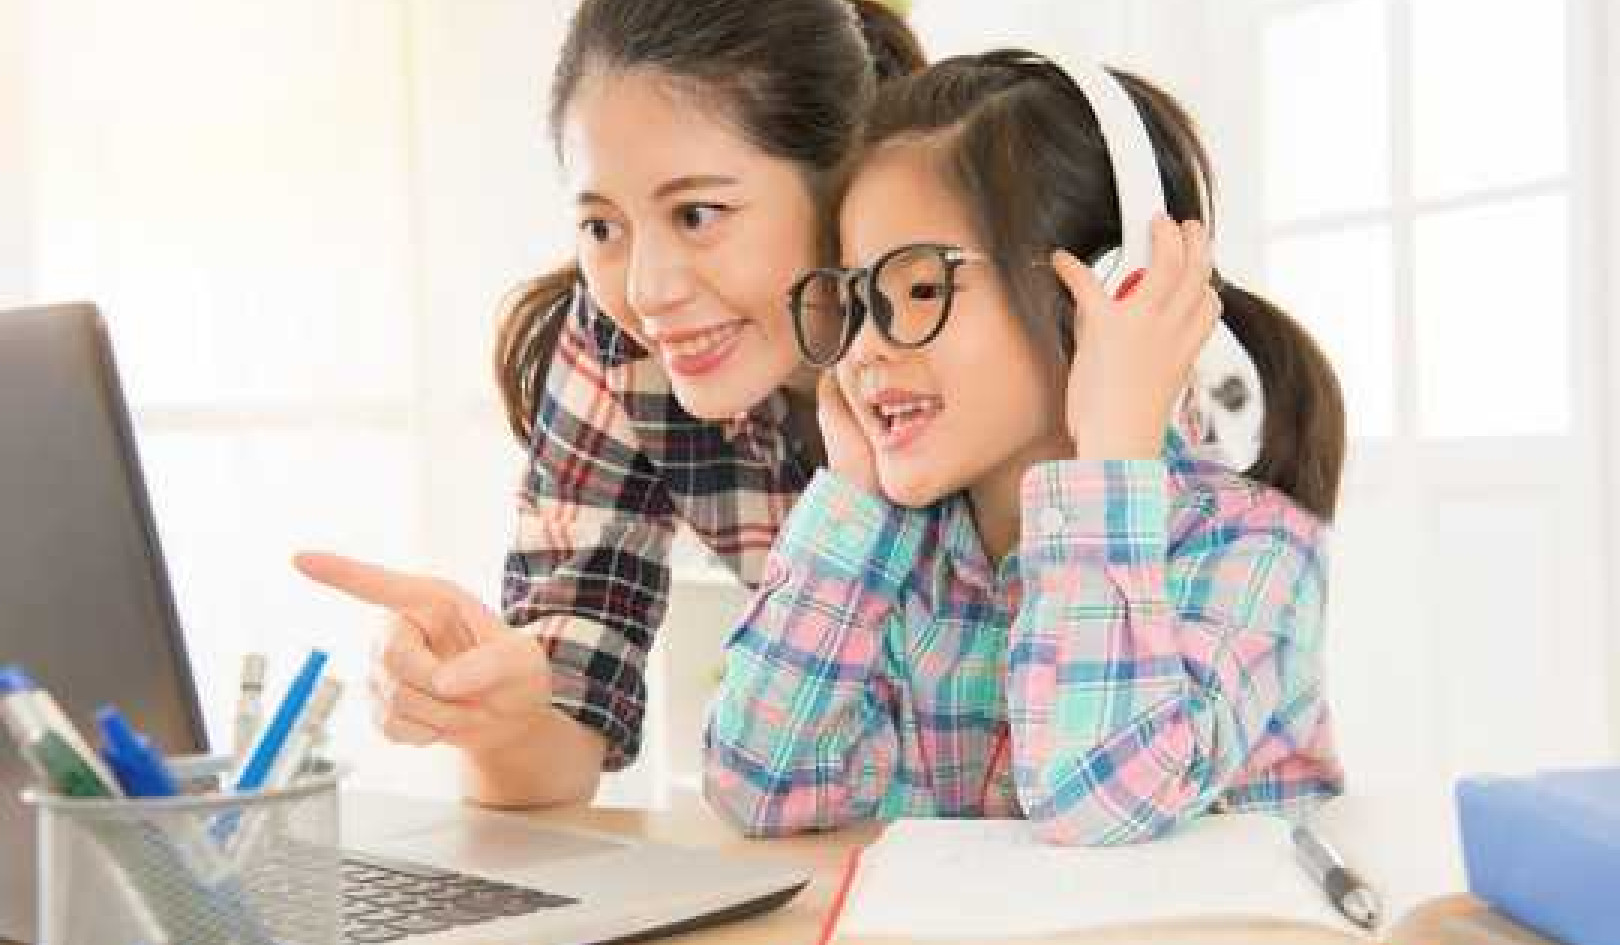 How To Protect Your Kids Ears While Using Headphones More During The Pandemic?